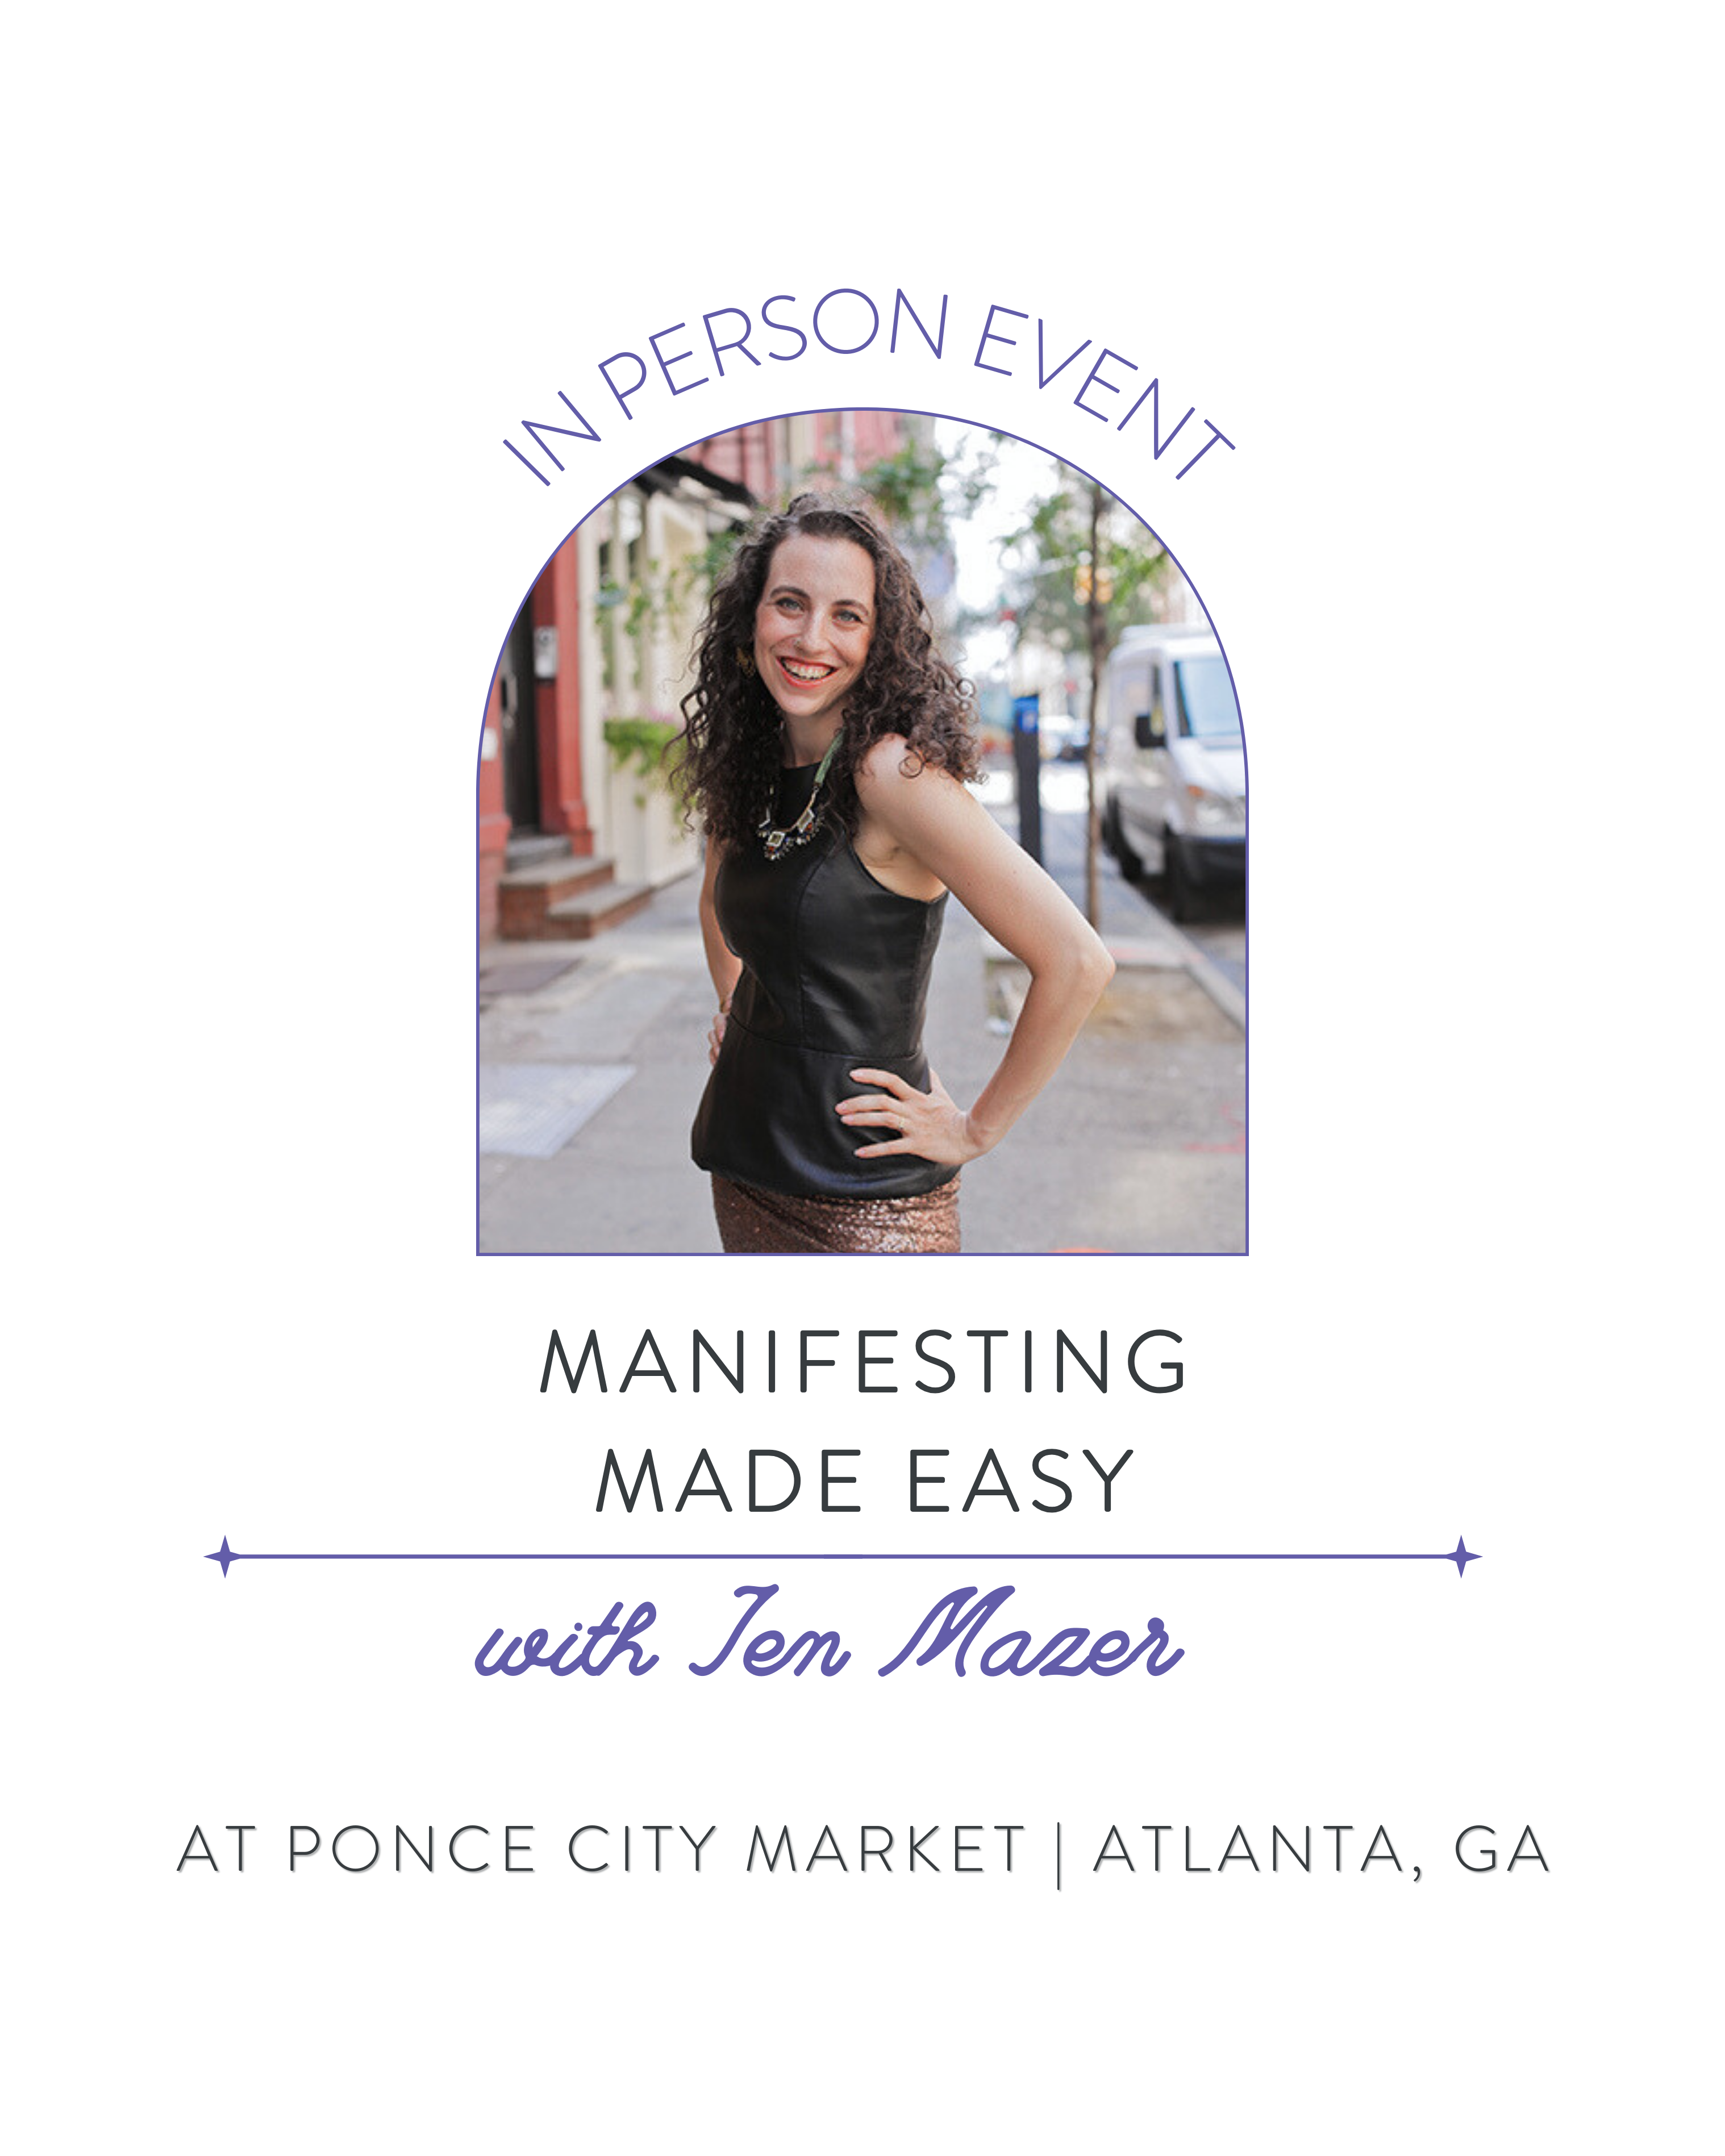 Manifesting Made Easy with Jen Mazer